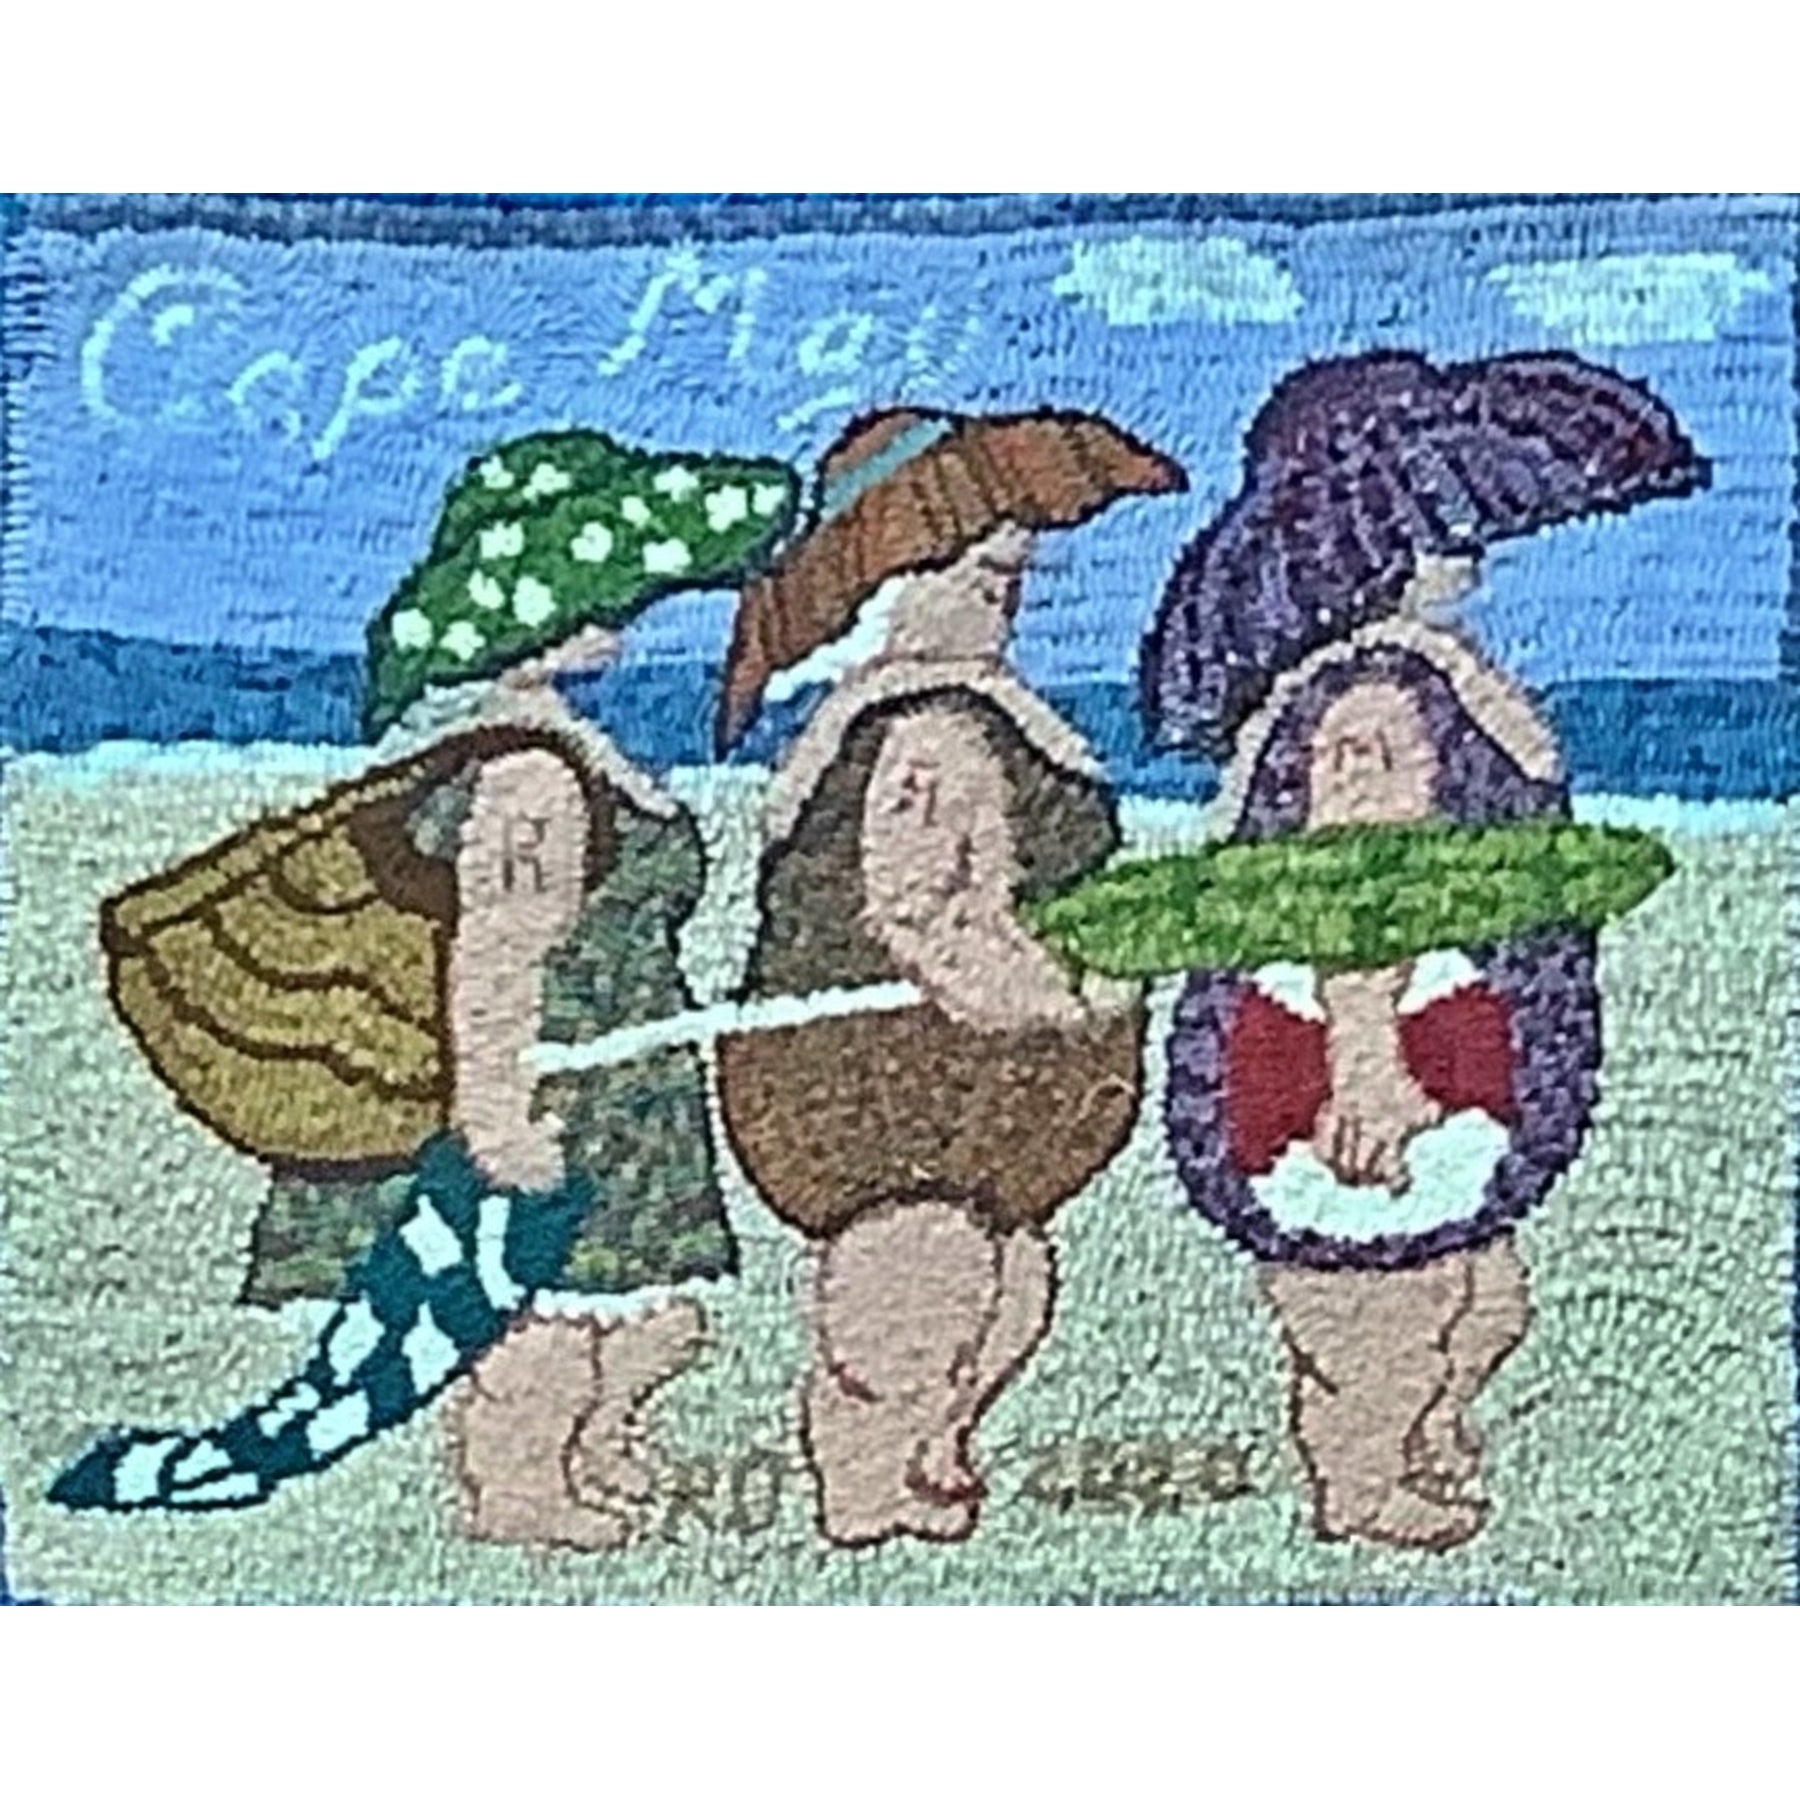 The Girls on the Beach, rug hooked by Roberta Olah